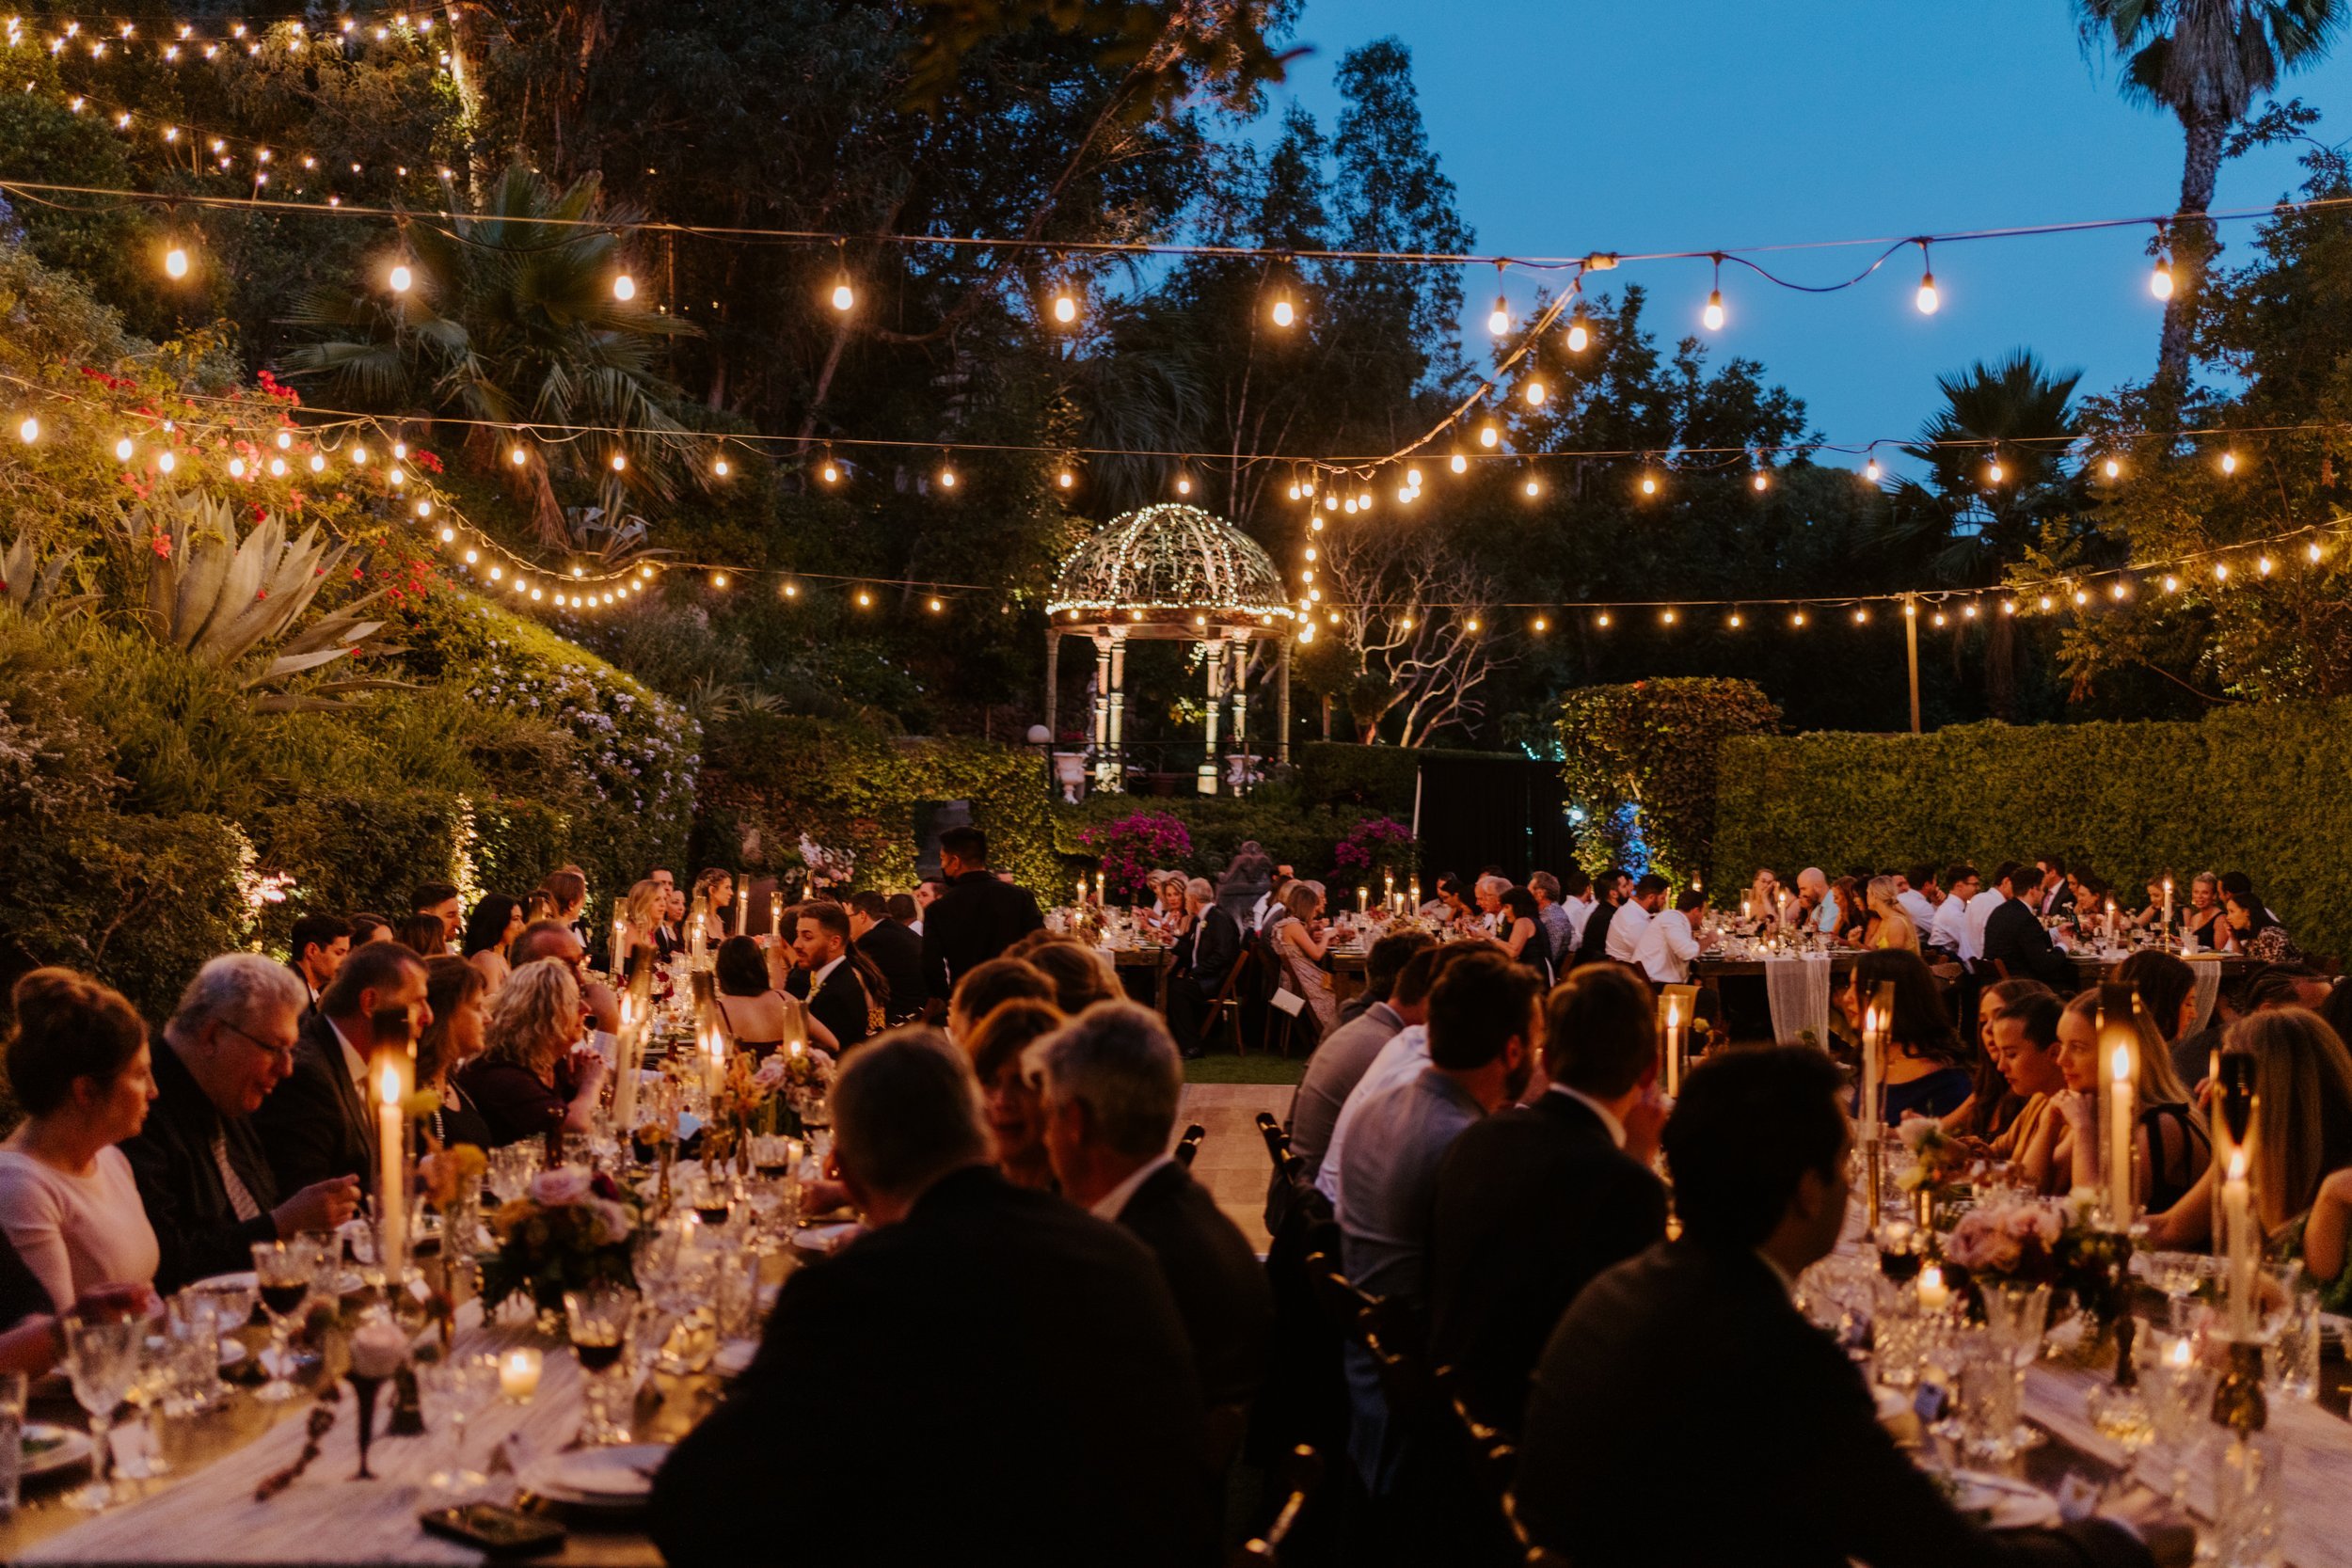 Romantic dimly lit wedding reception with string lights at The Houdini Estate wedding in los angeles, candid and vibrant wedding photography by Tida Svy